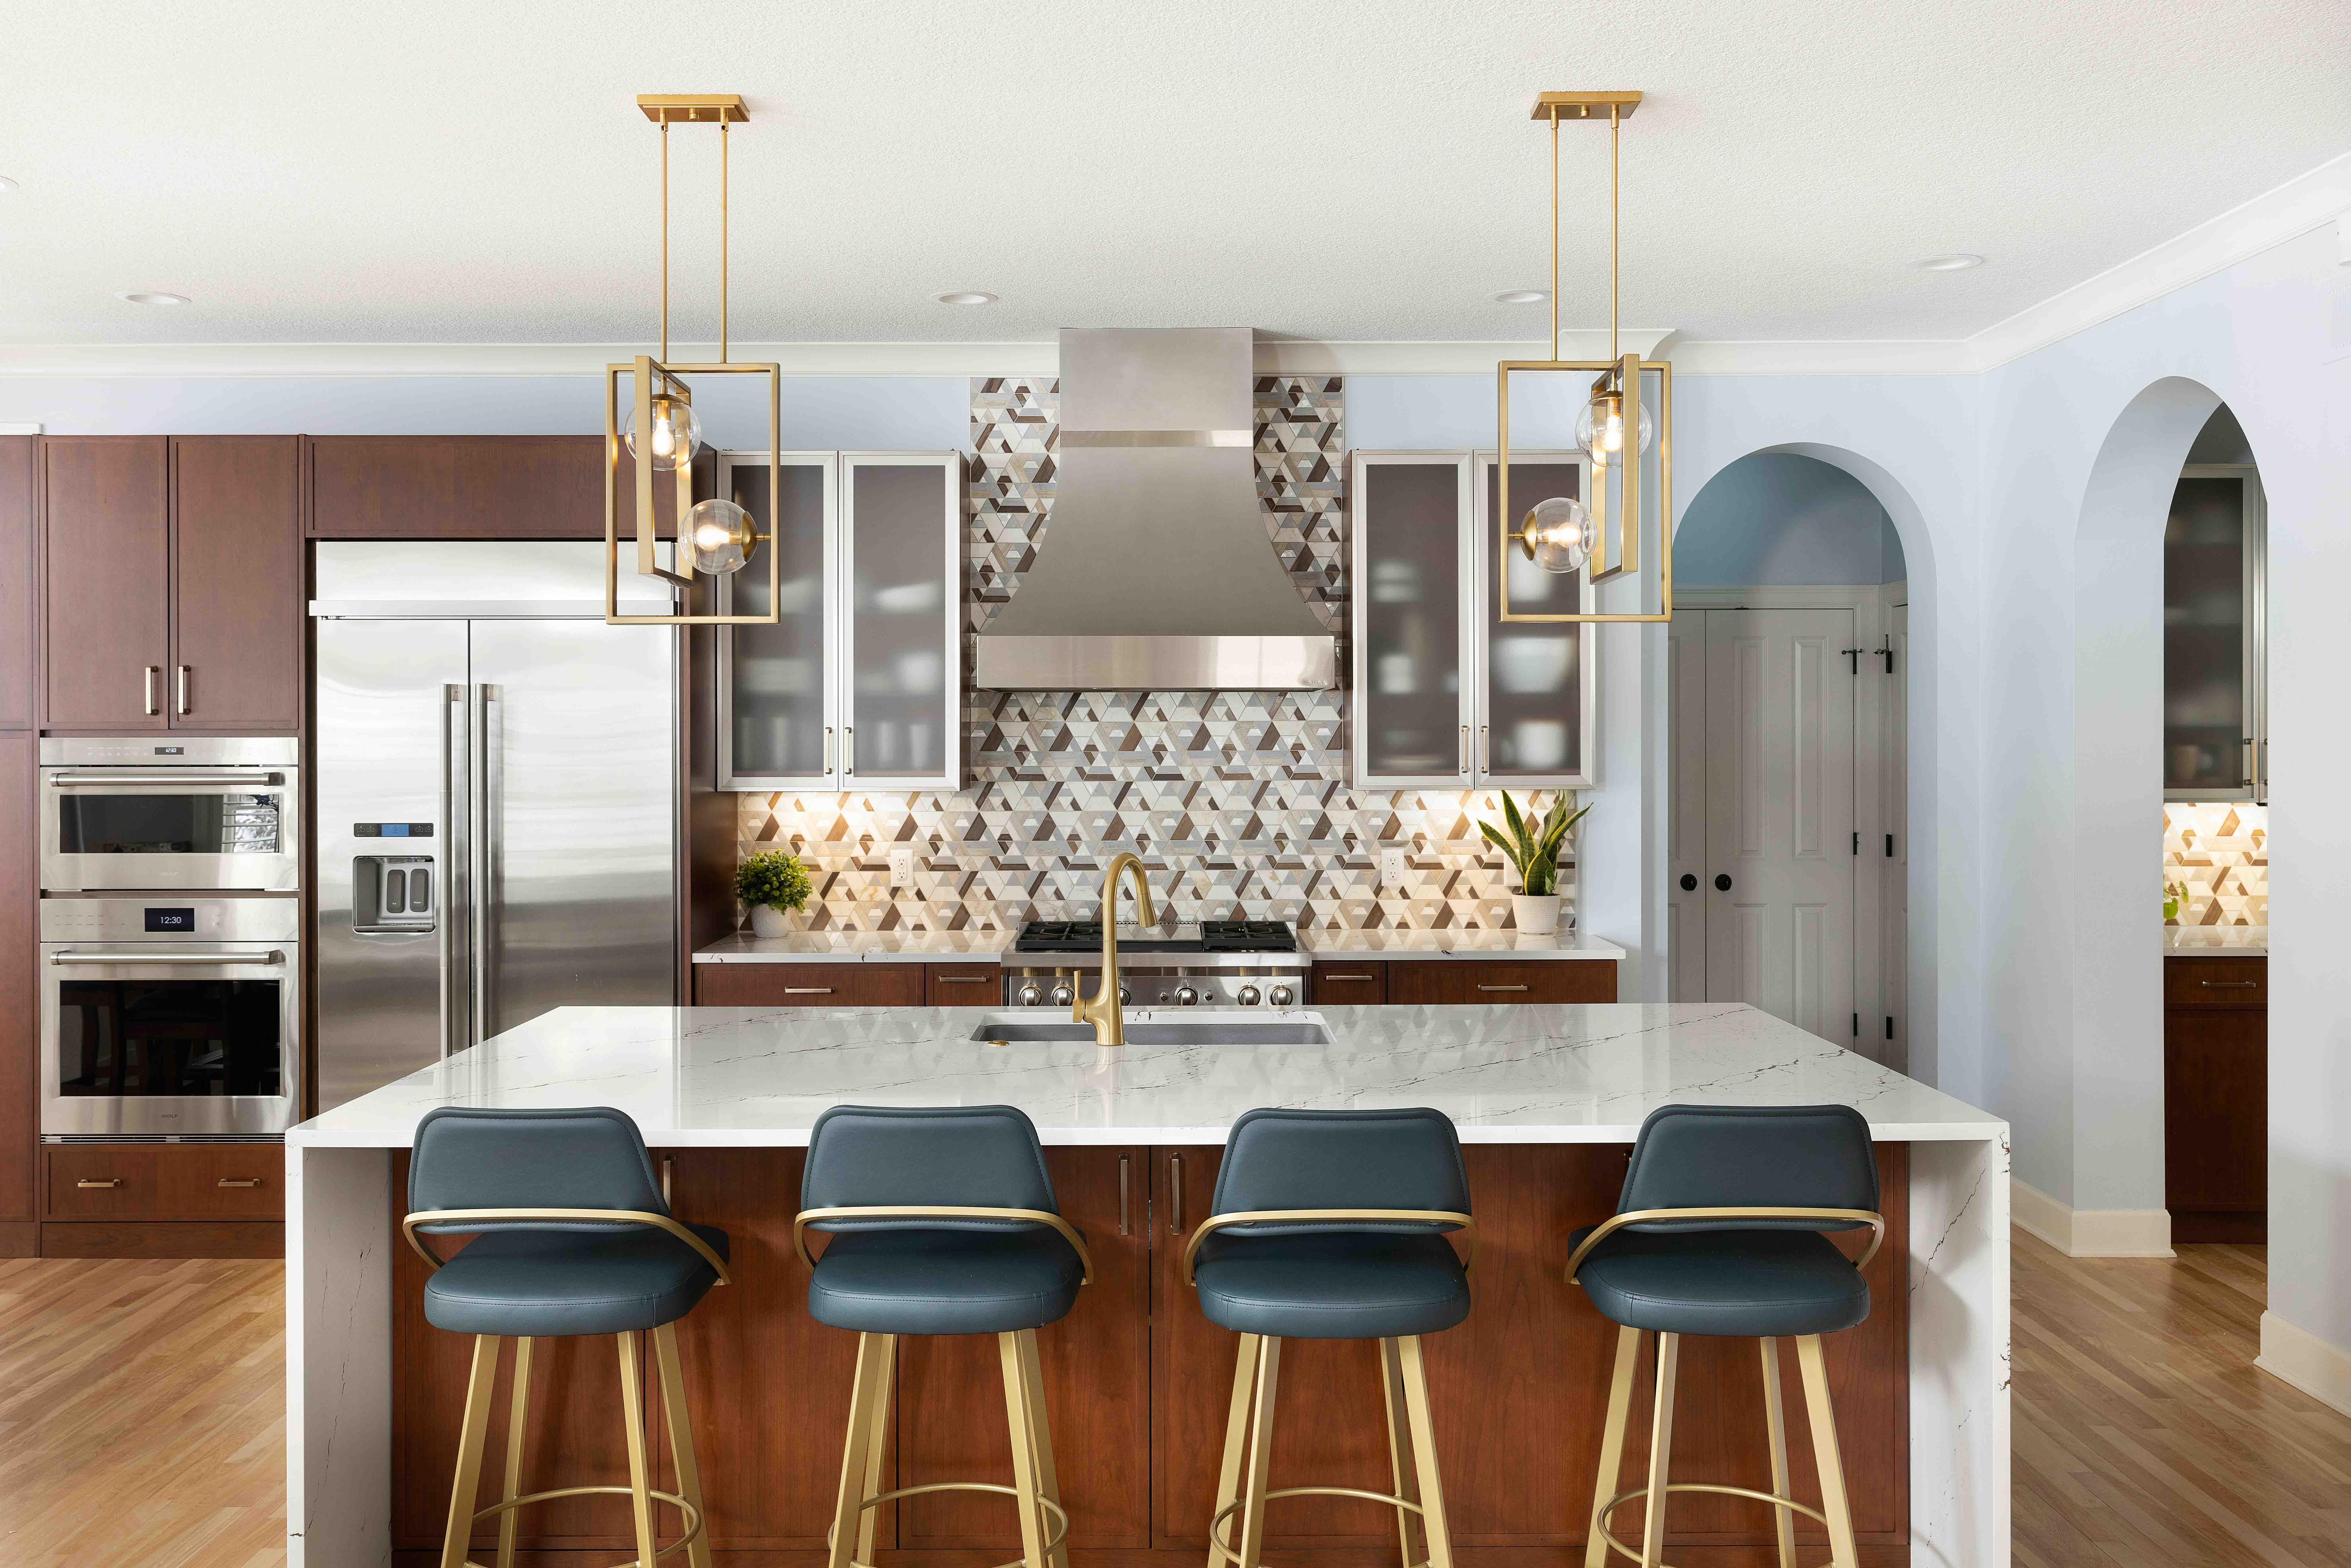 Kitchen remodel with mixed metals, large island with pendant lights